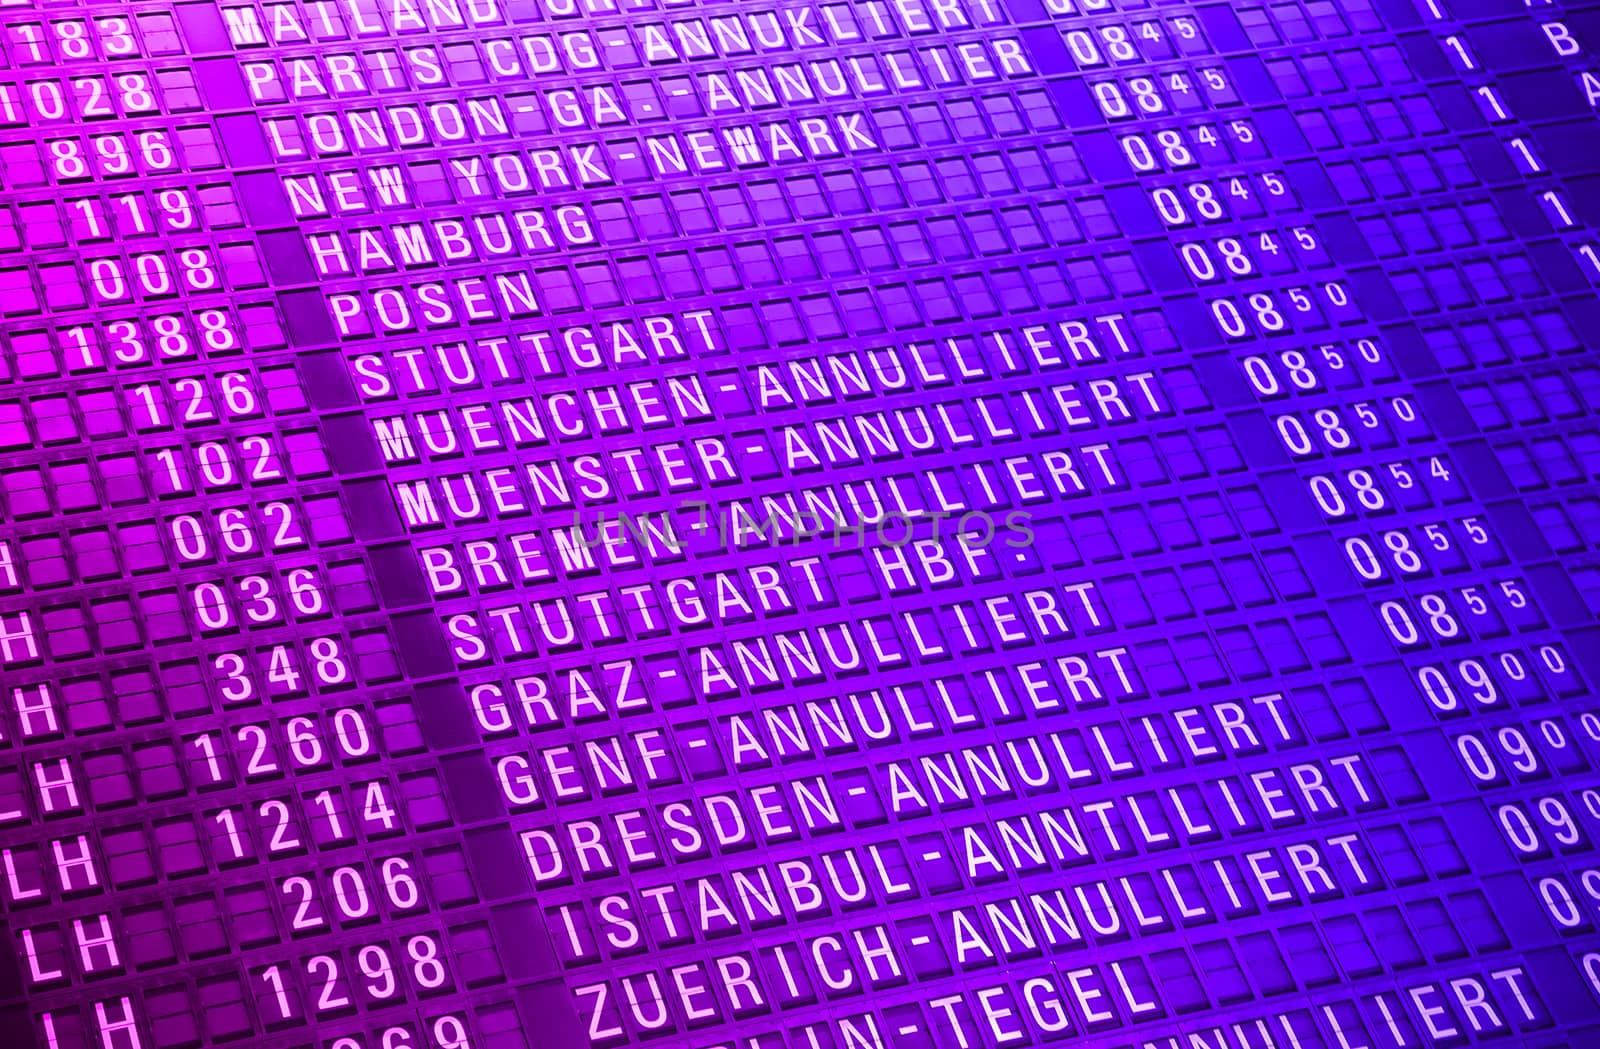 Airport timeboard by swisshippo